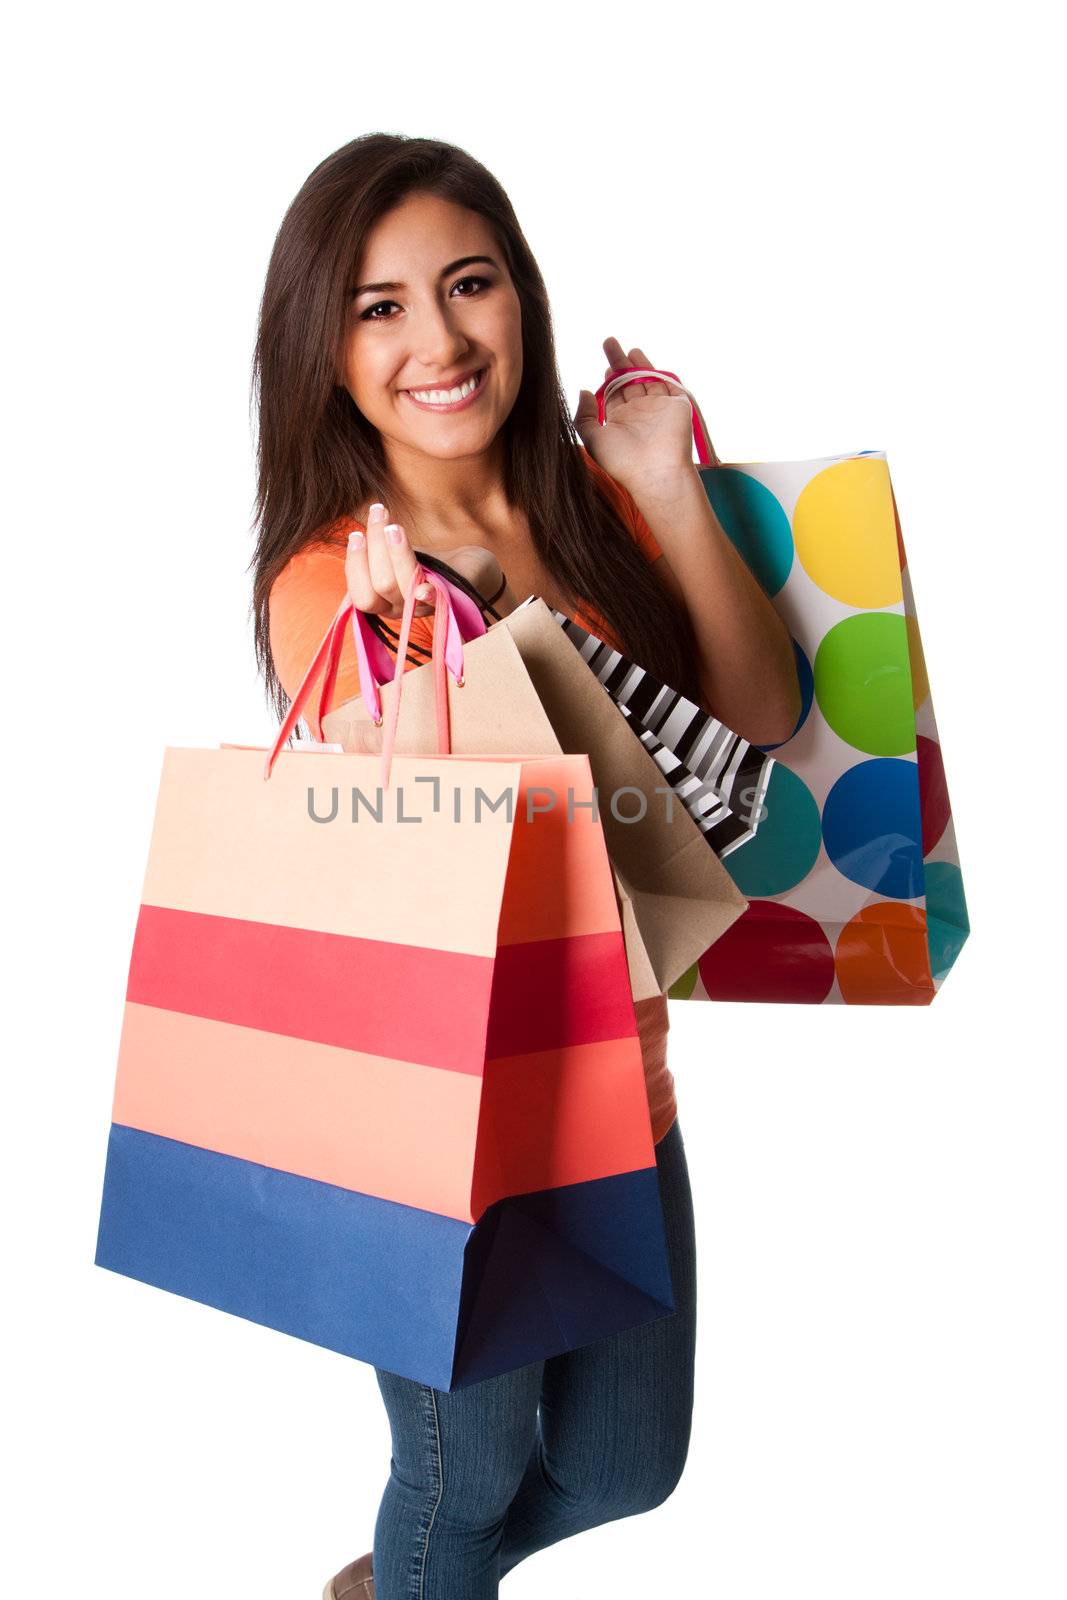 Beautiful Happy smiling young woman on shopping spree carrying colorful bags with merchandise, isolated.